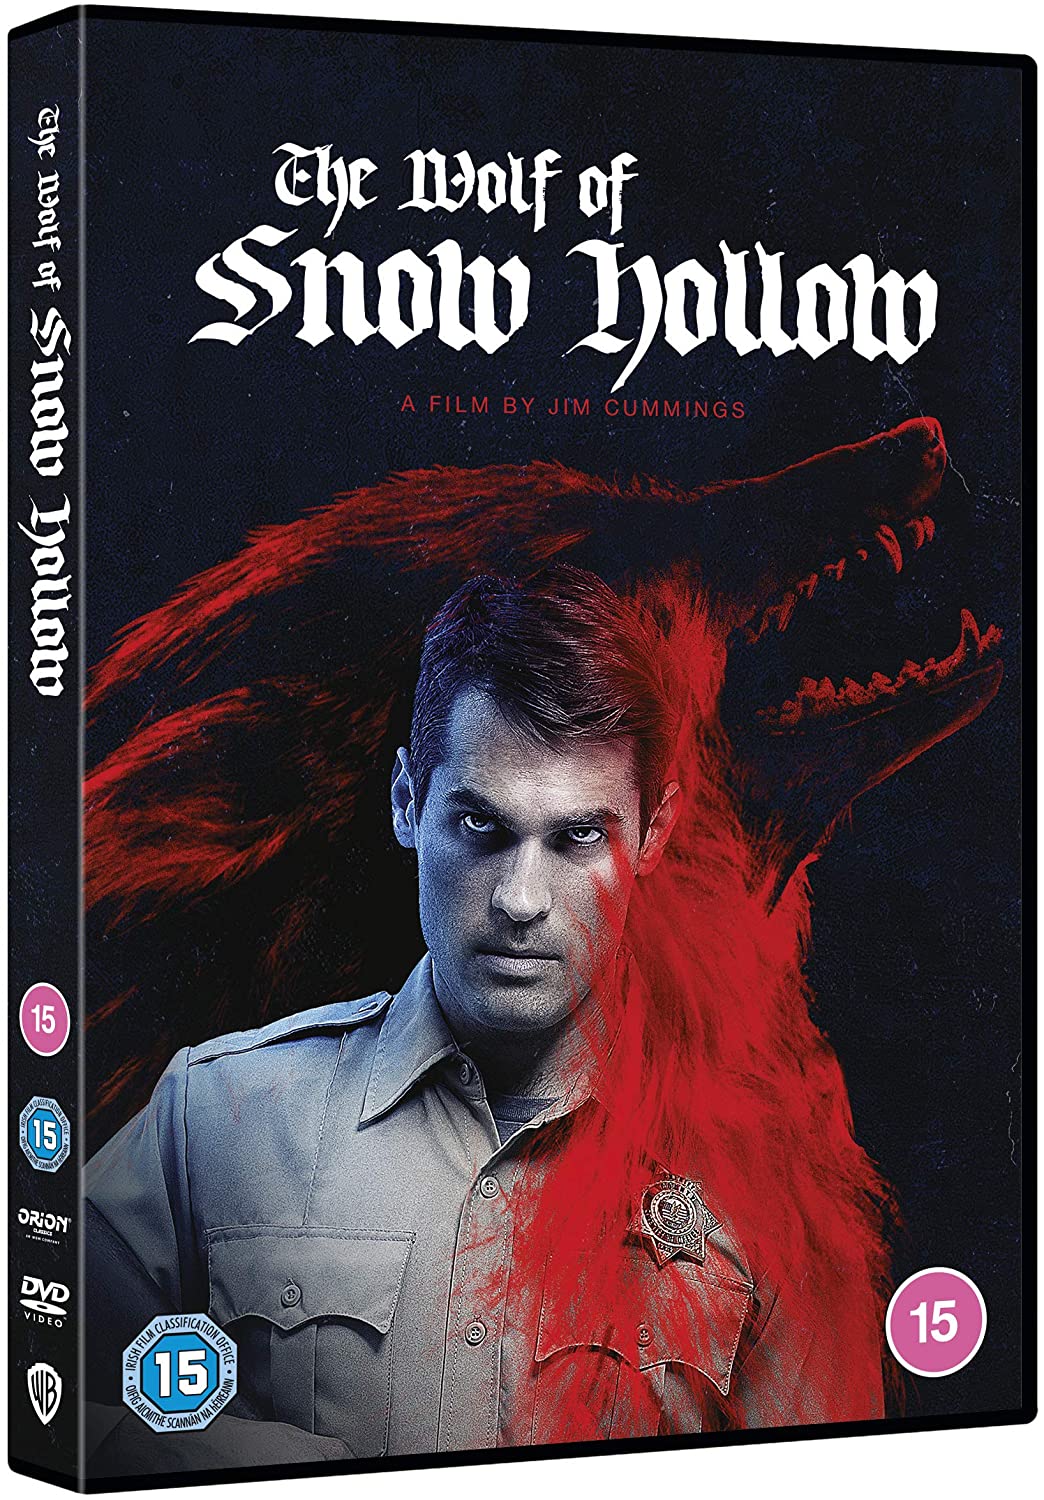 The Wolf of Snow Hollow (DVD)